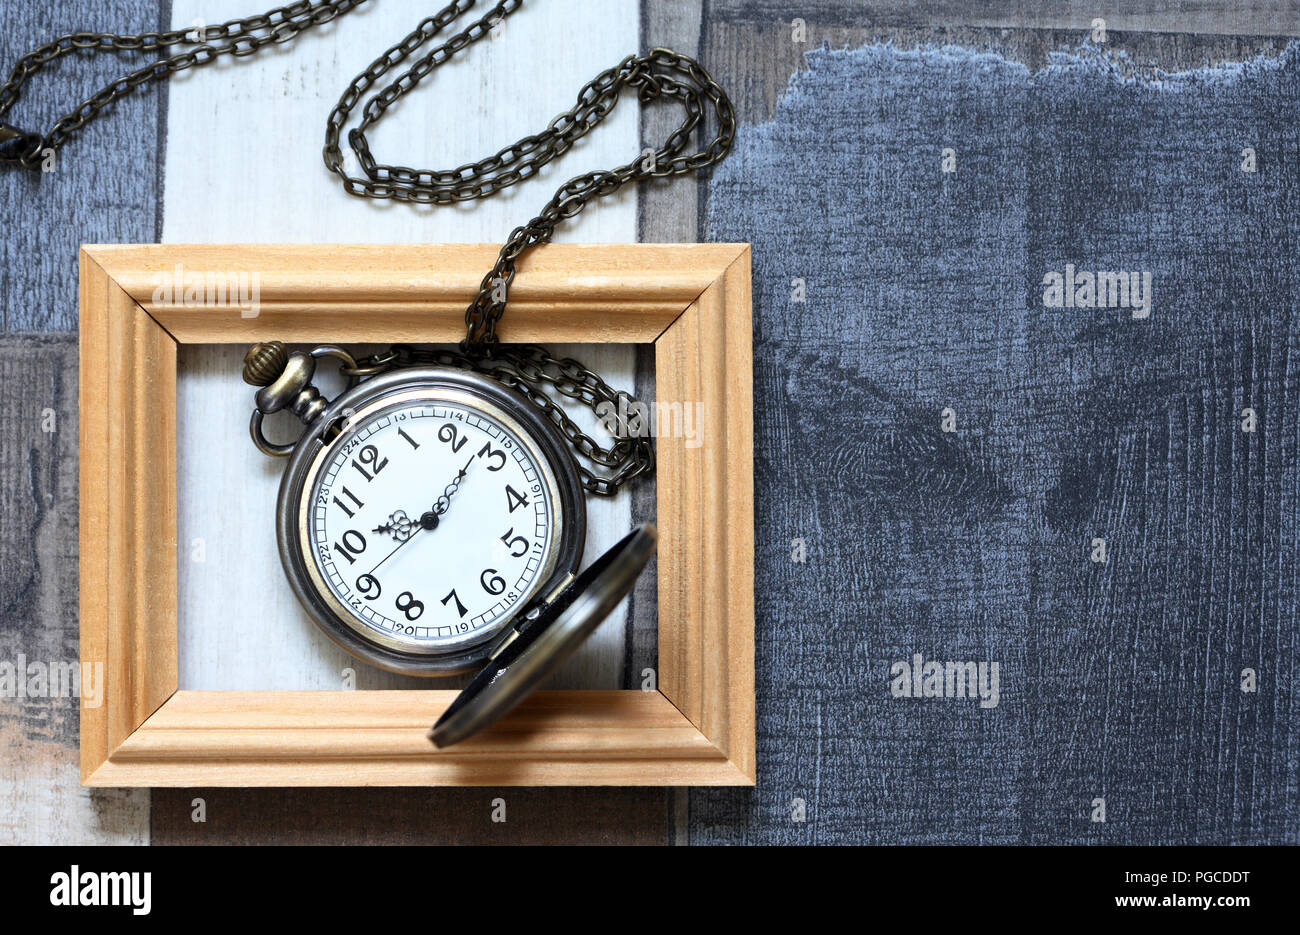 Vintage still life with old pocket watch inside wooden picture frame Stock Photo